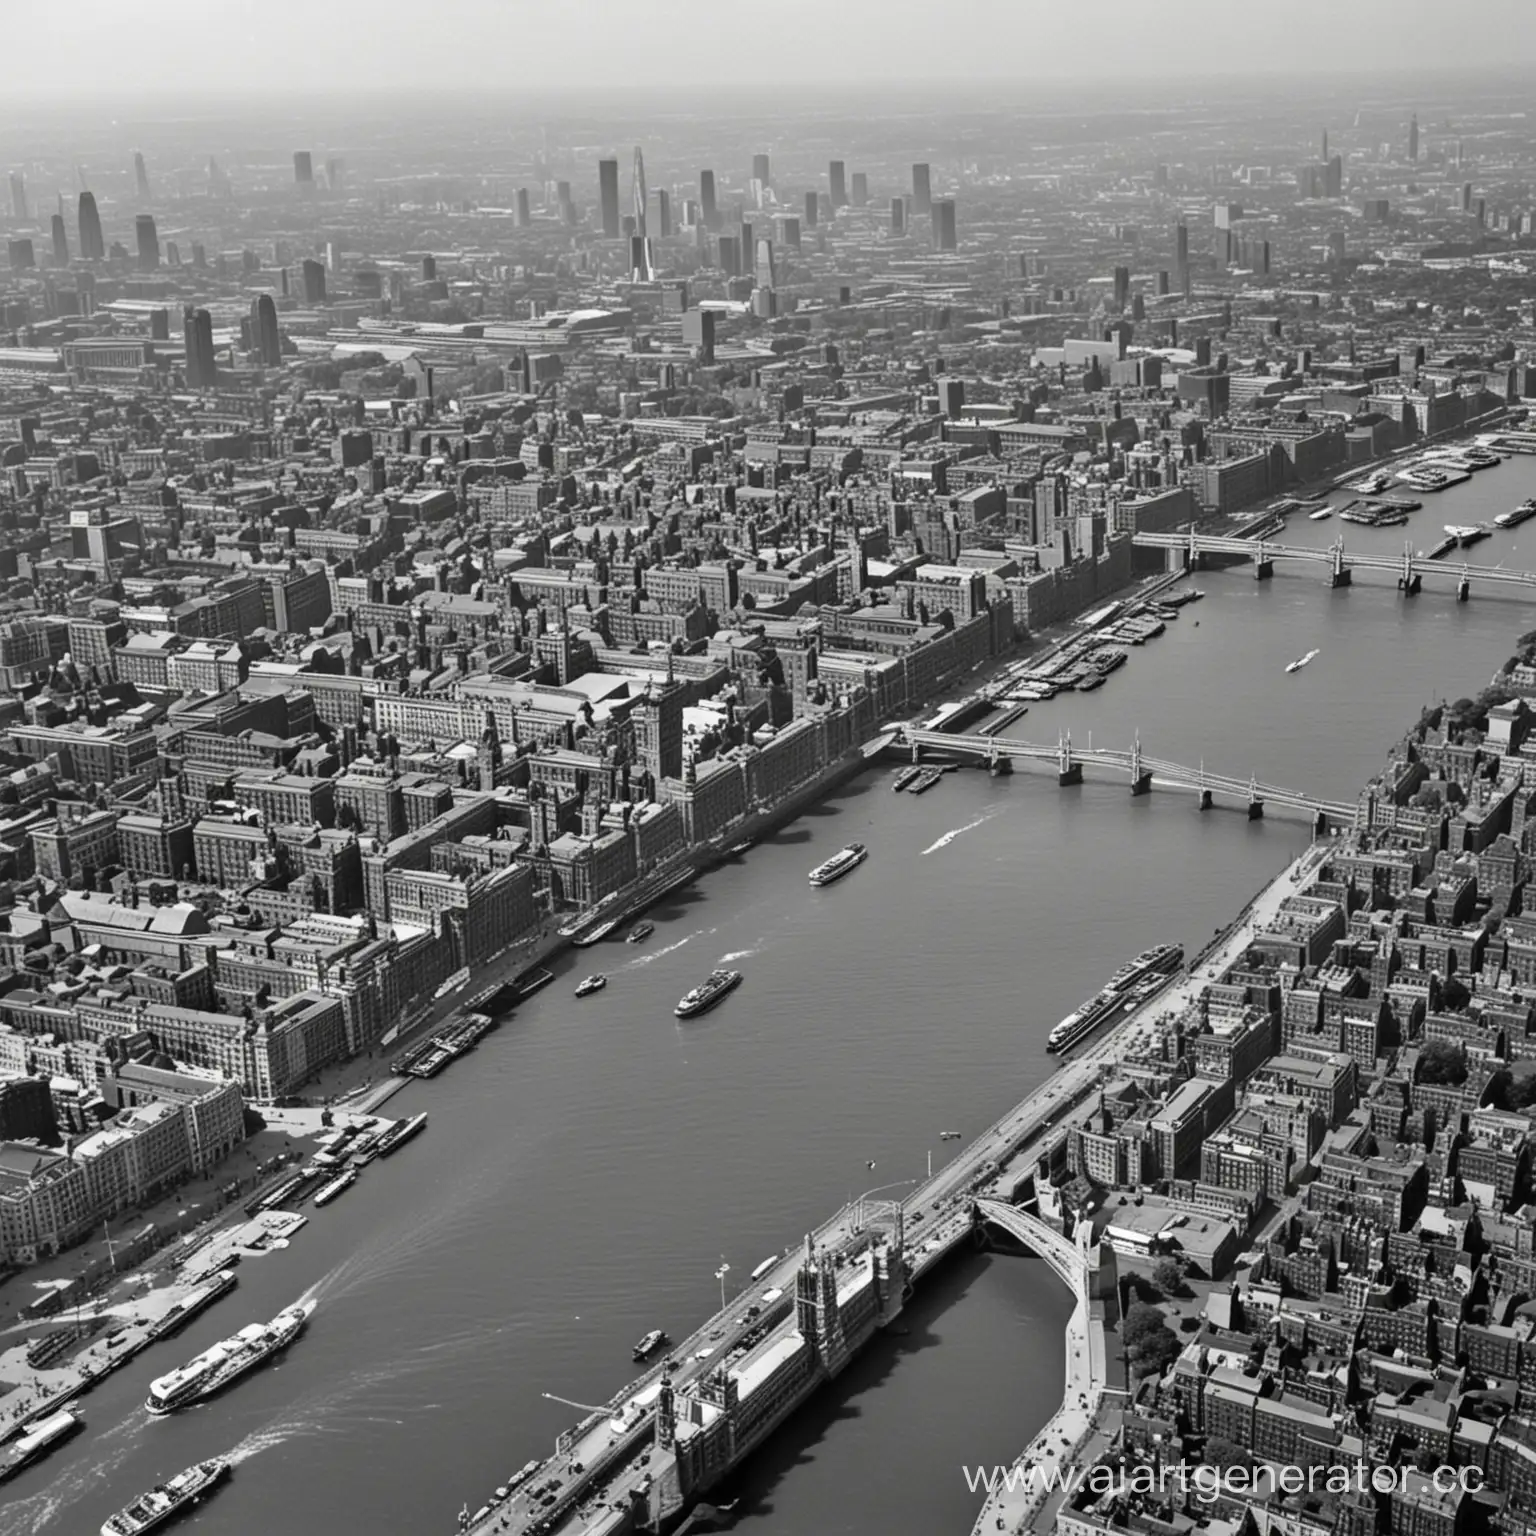 London of the 50s, and next to it a large bridge that leads to another island.